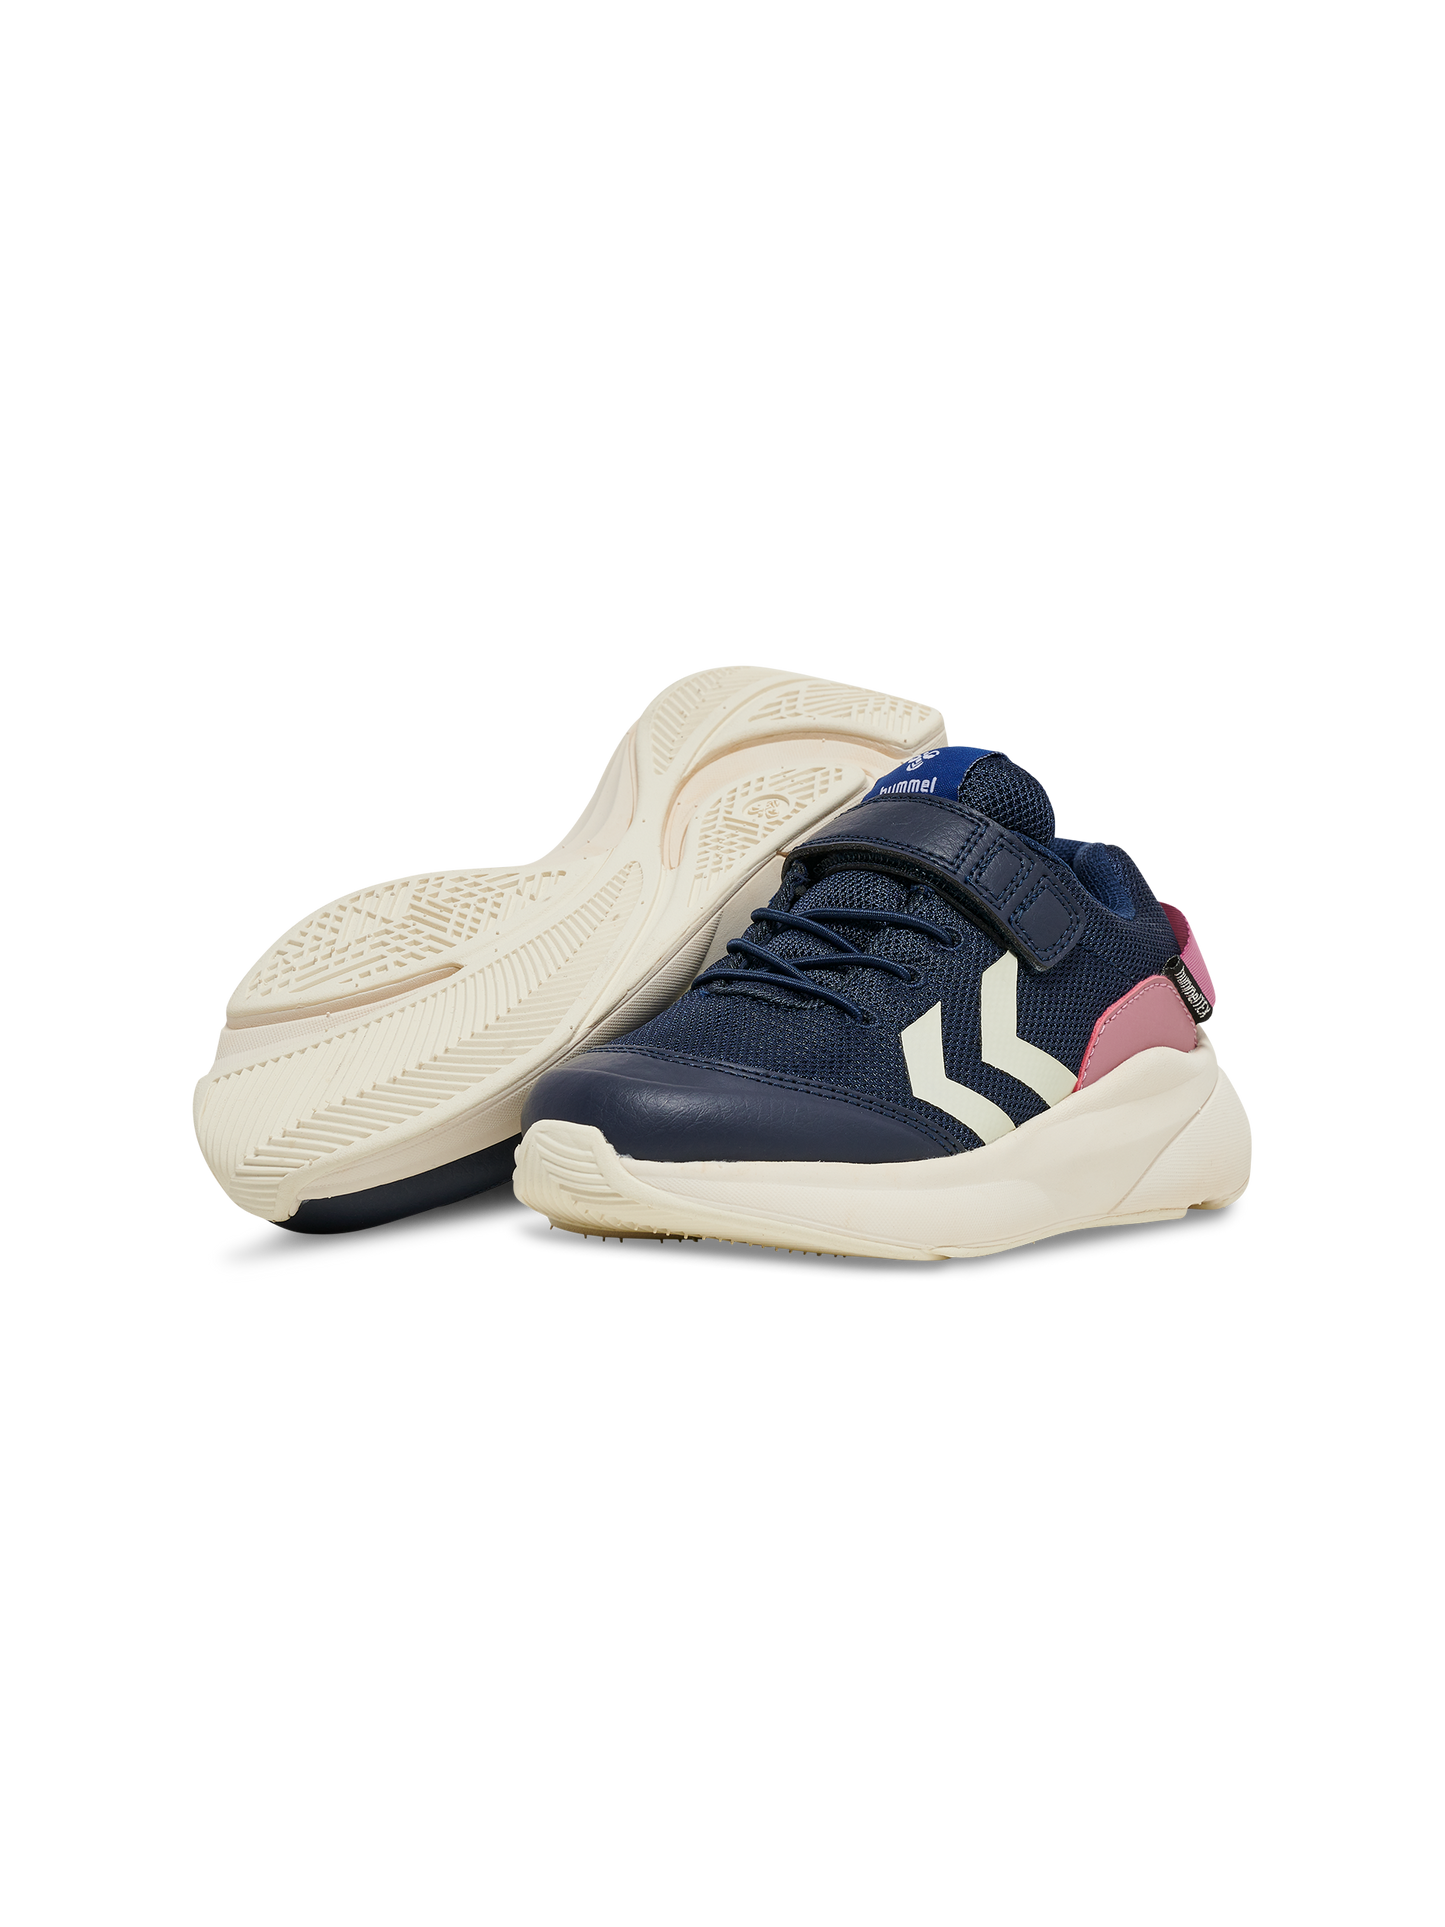 Hummel Black Iris and Pink Reach Water Resistant Trainers